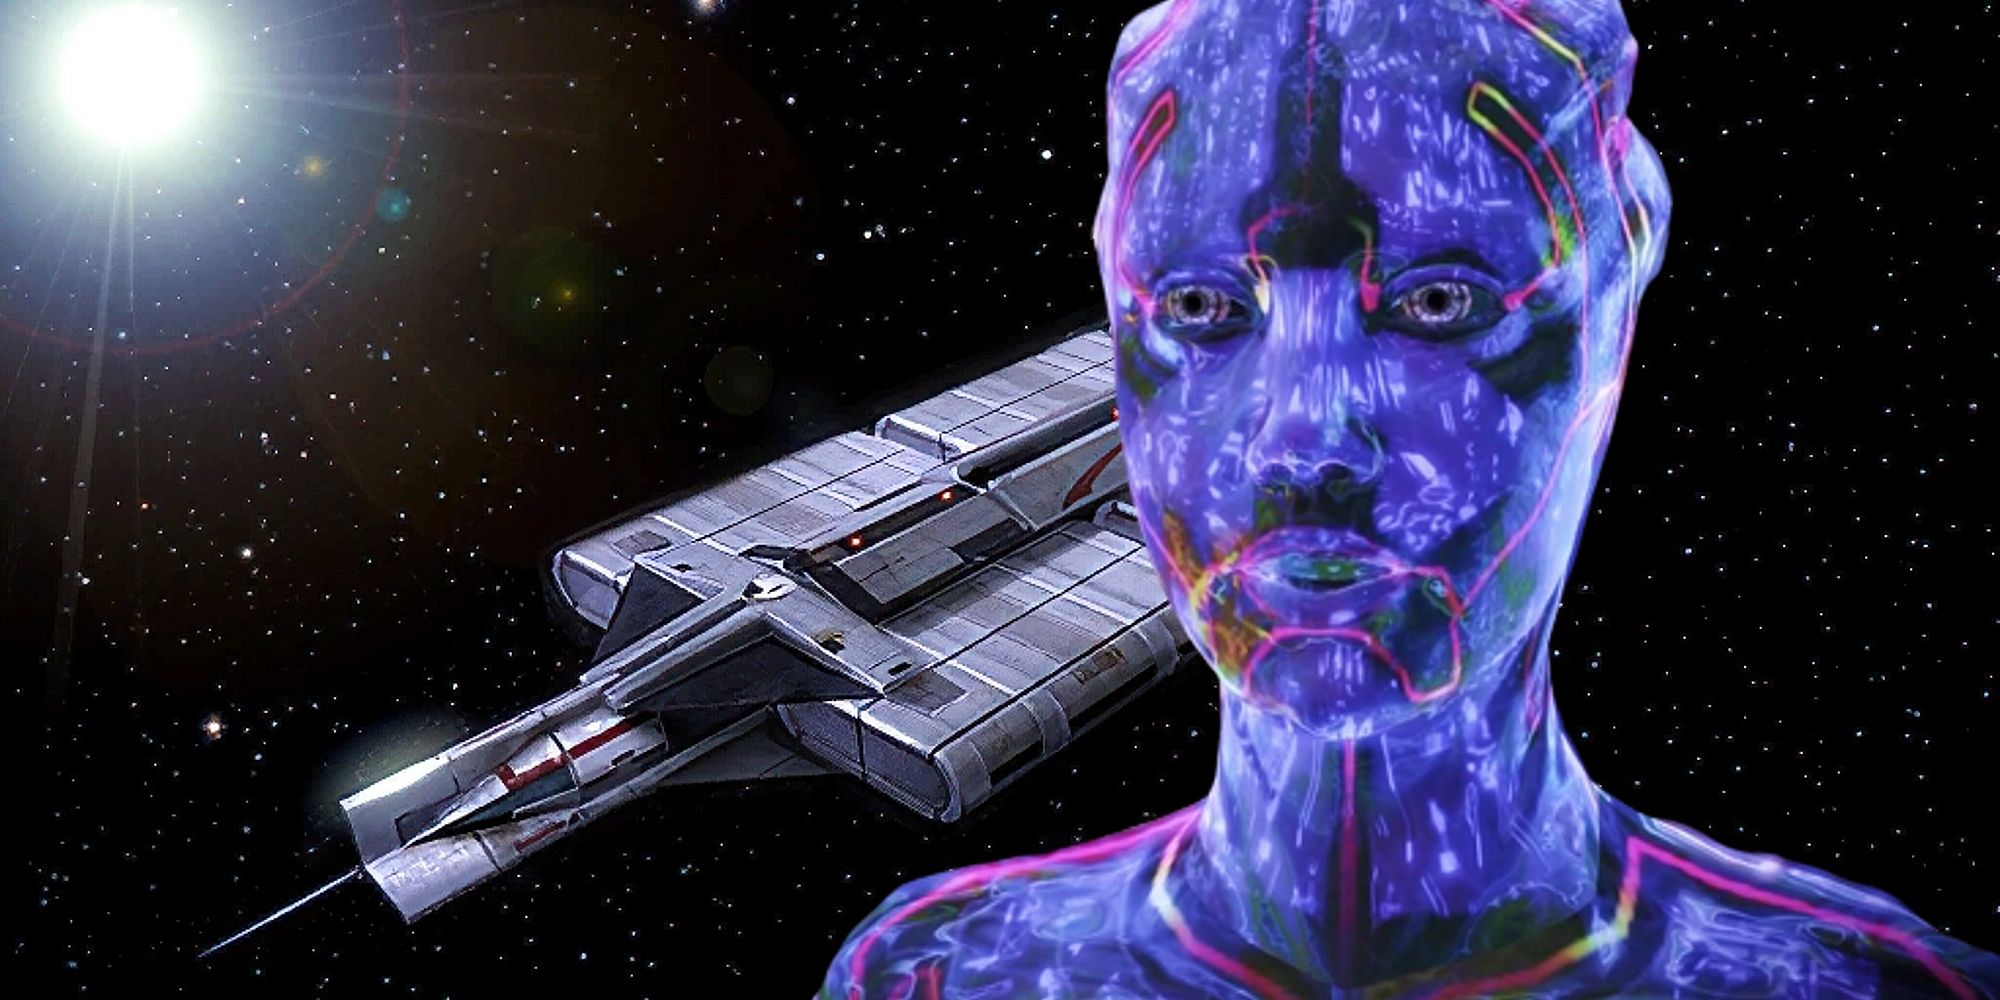 Image of the Asari Citadel virtual intelligence Avina with an abandoned ship pictured in the background.